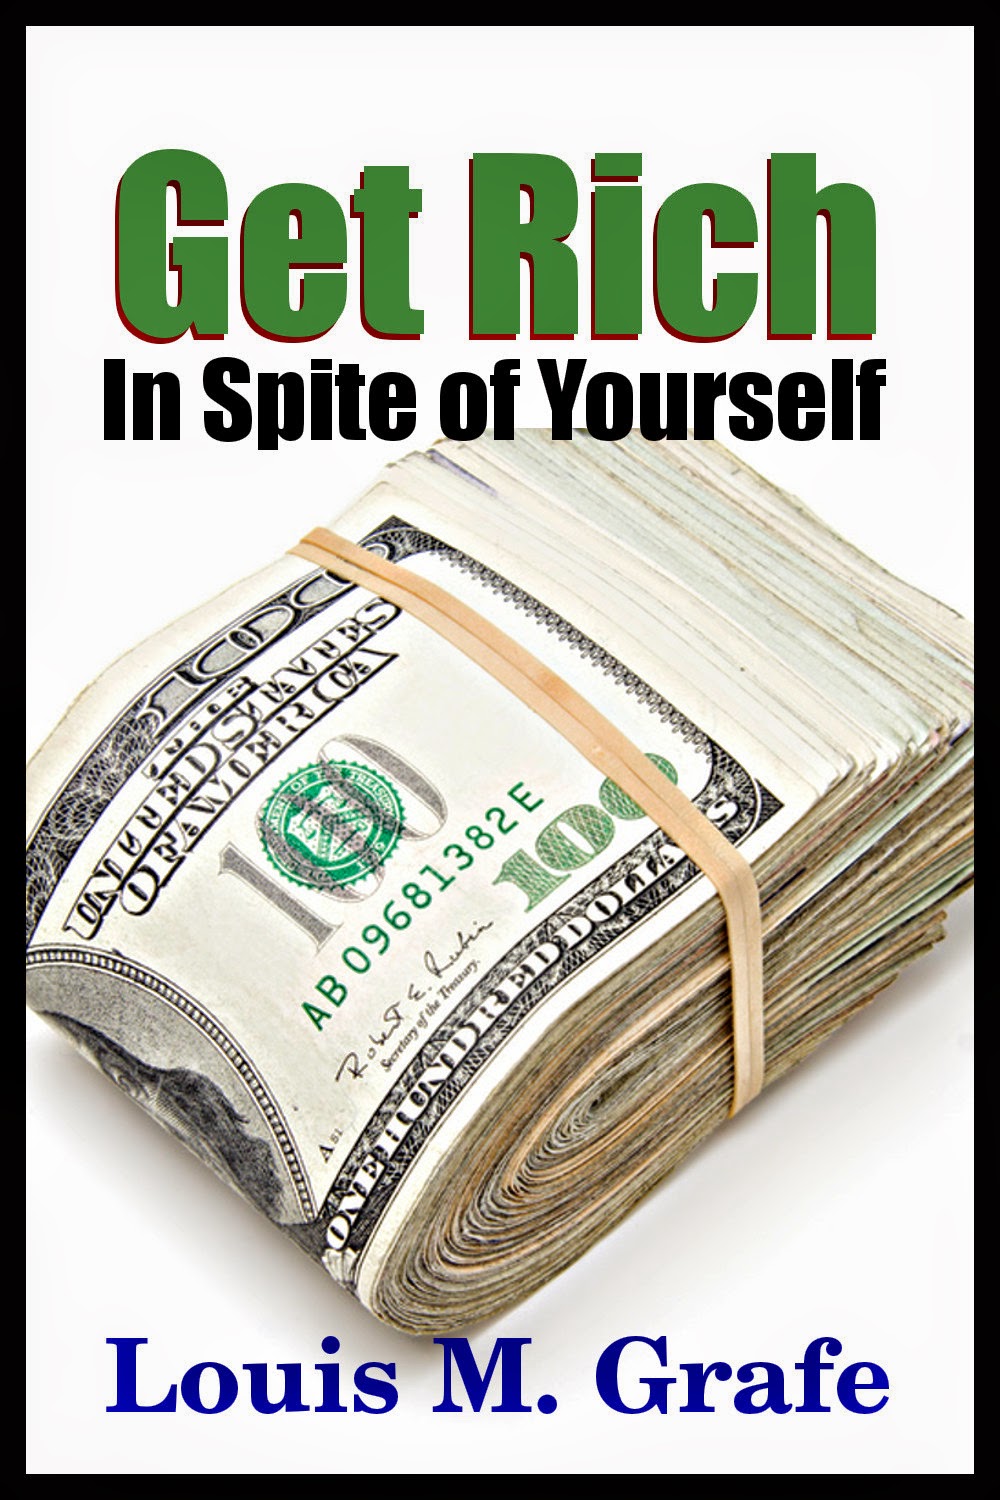 New Release: Louis M. Grafe's "Get Rich In Spite of Yourself"